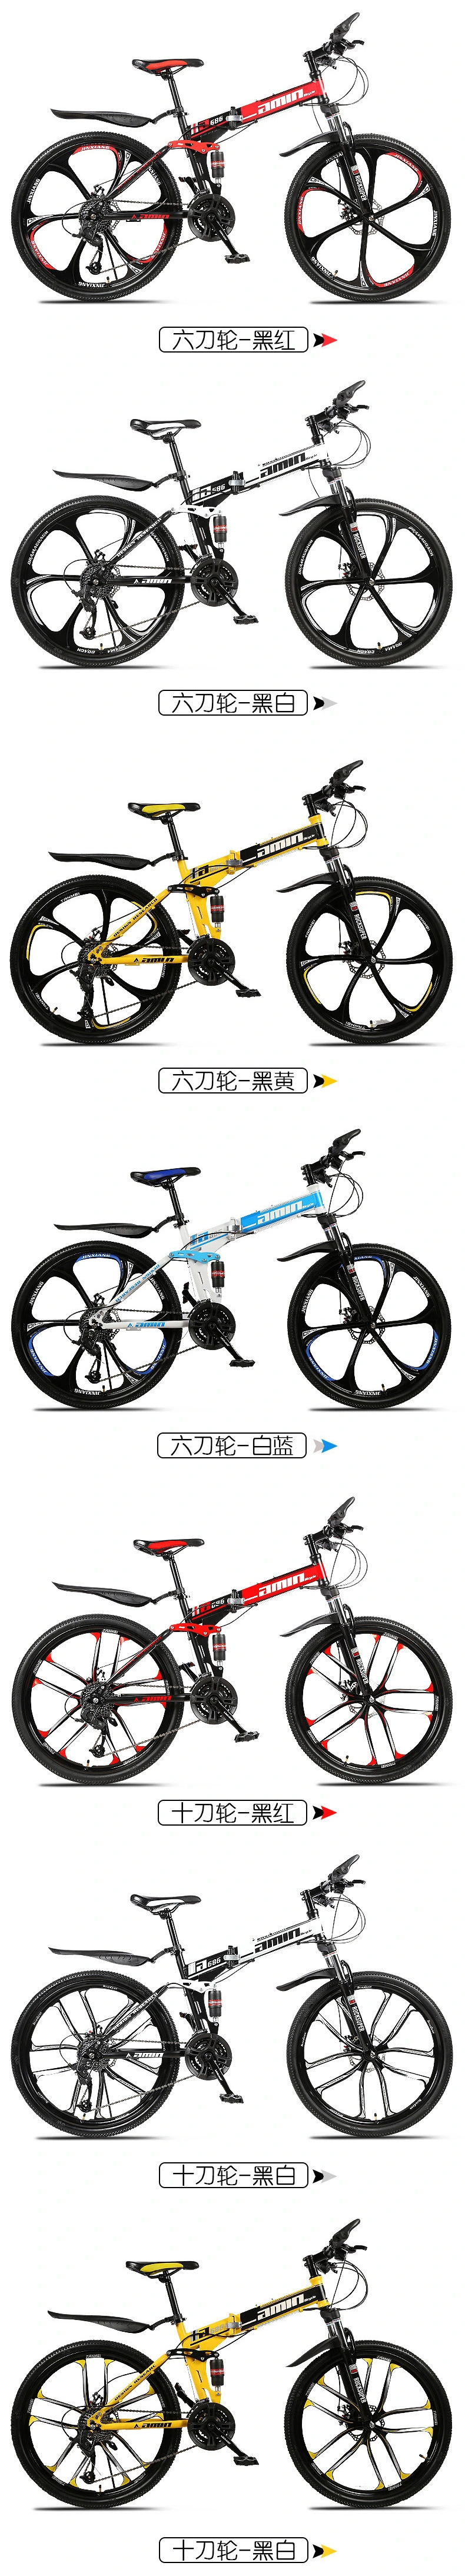 Convenient, Lightweight, Trendy Bike, Foldable Mountain Bike, Excellent Brake Shifting and Shock Absorption System